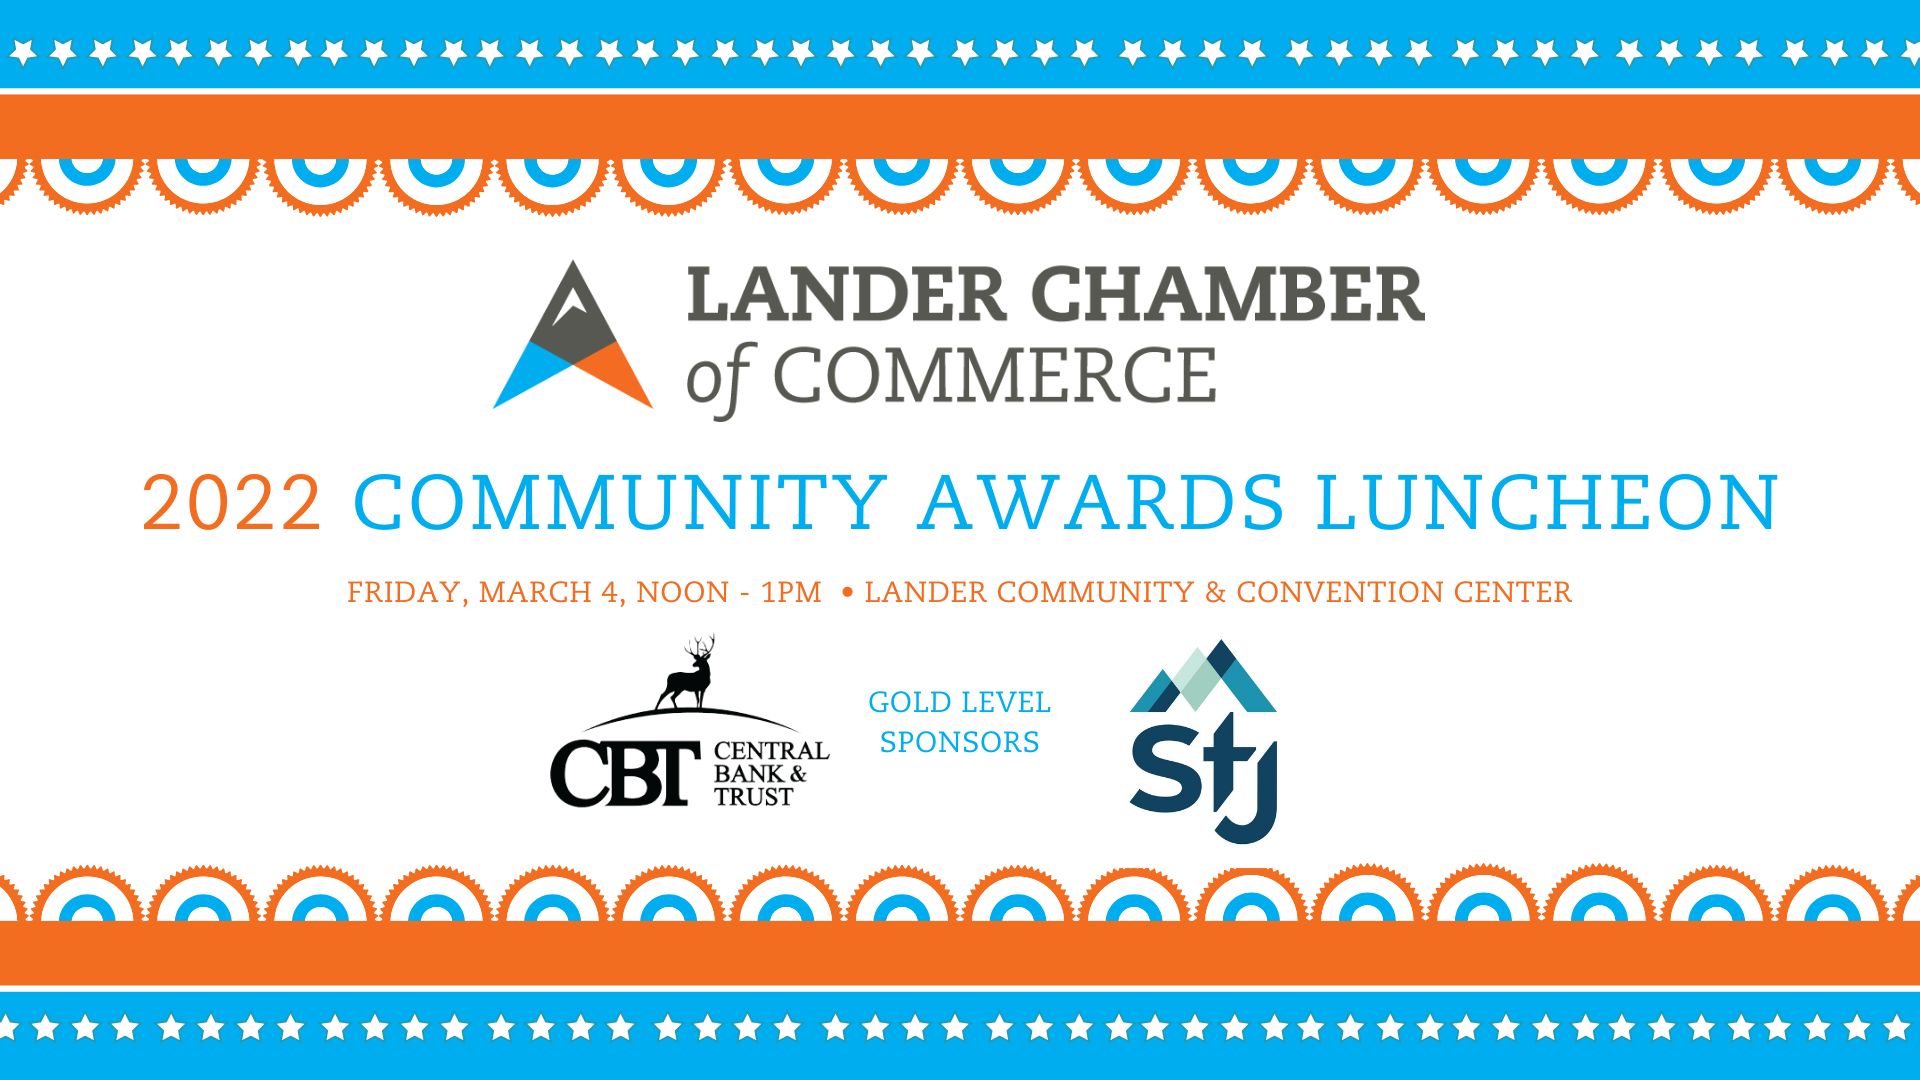 Chamber of Commerce Annual Community Awards Luncheon